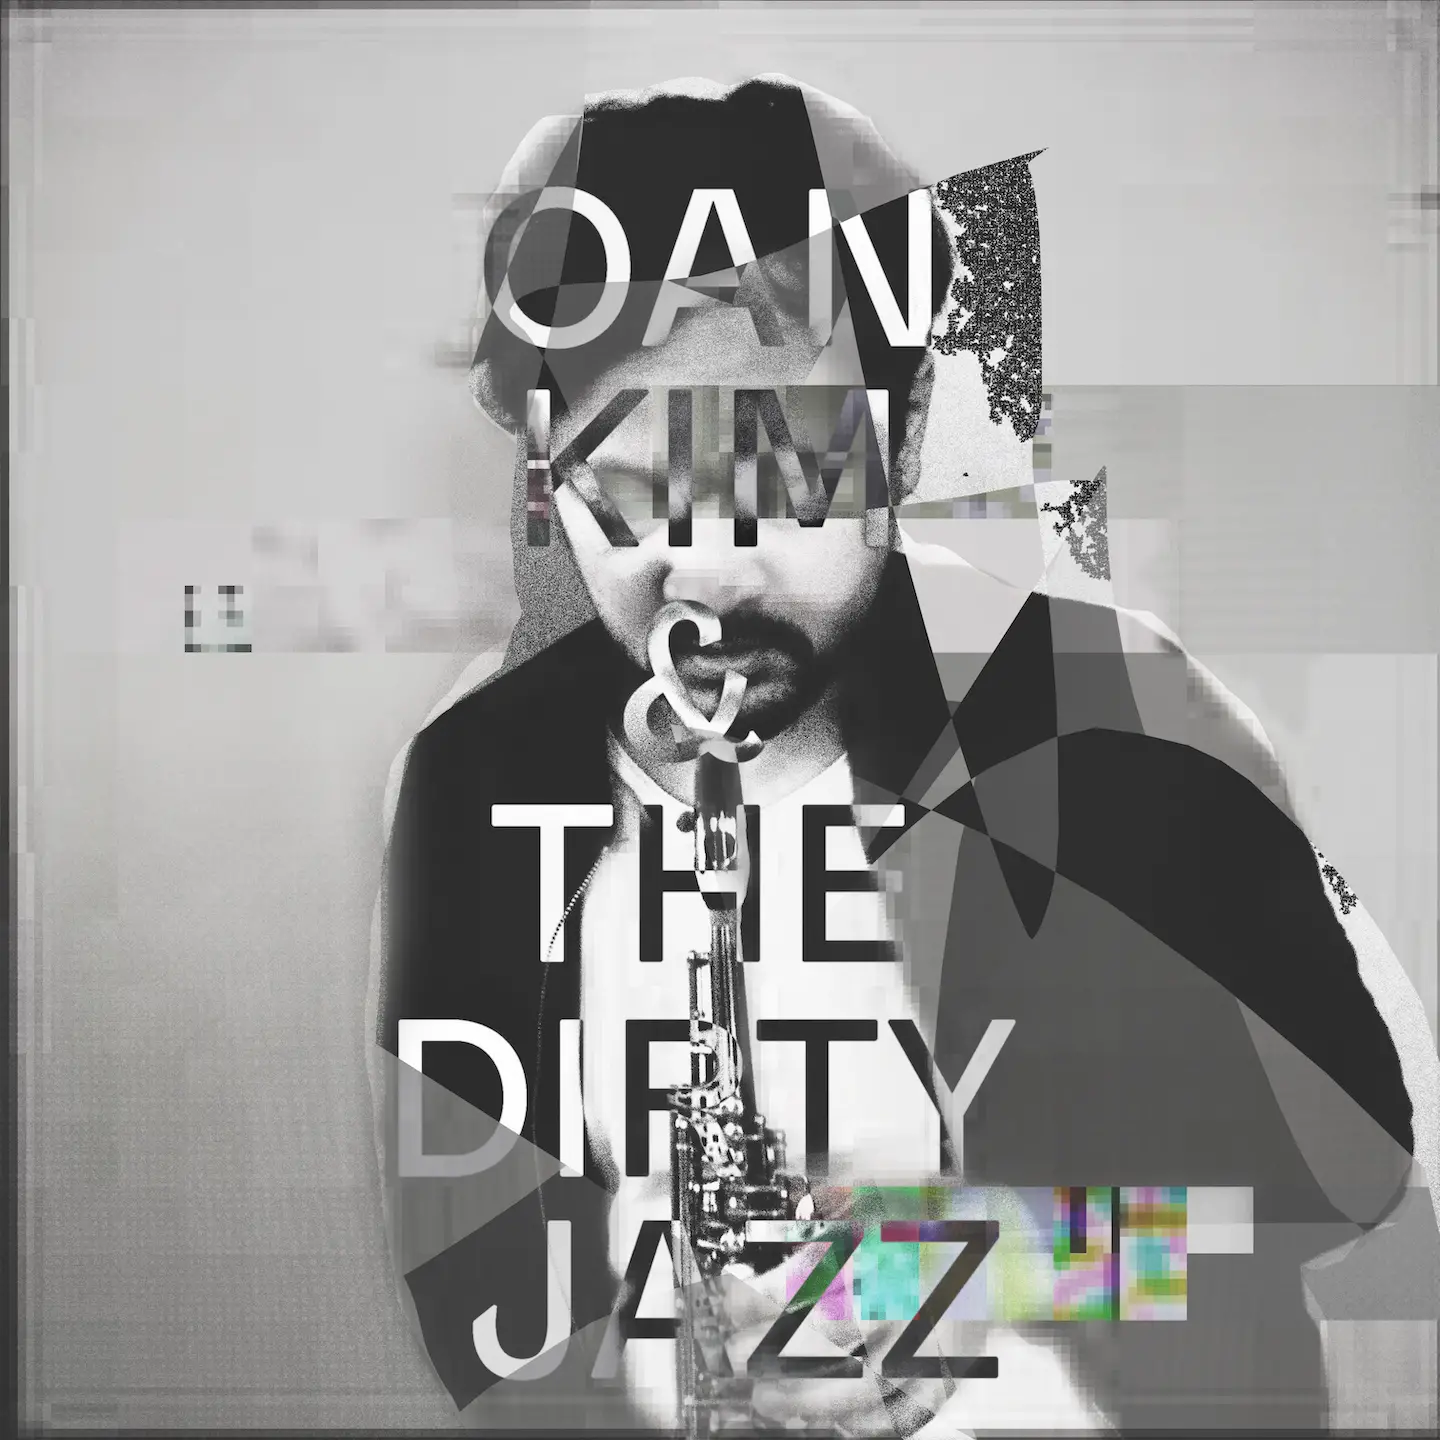 Oan Kim - 'Oan Kim & the Dirty Jazz' Review | Opinions | LIVING LIFE FEARLESS